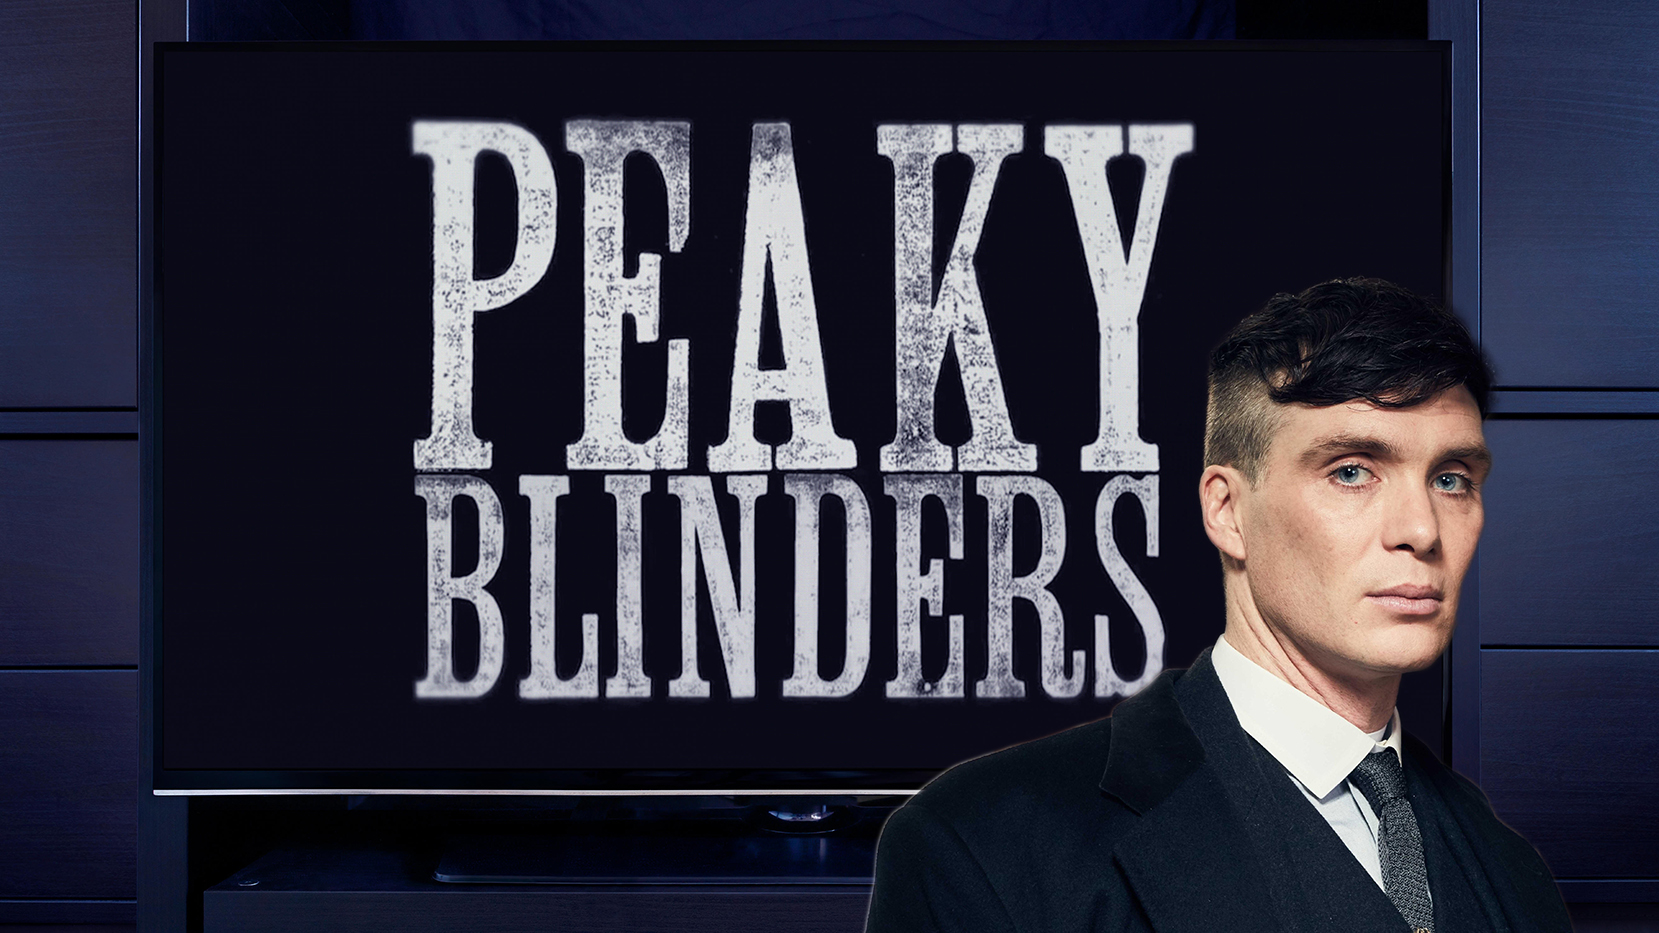 Peaky Blinders cast for season 6, returning & new characters